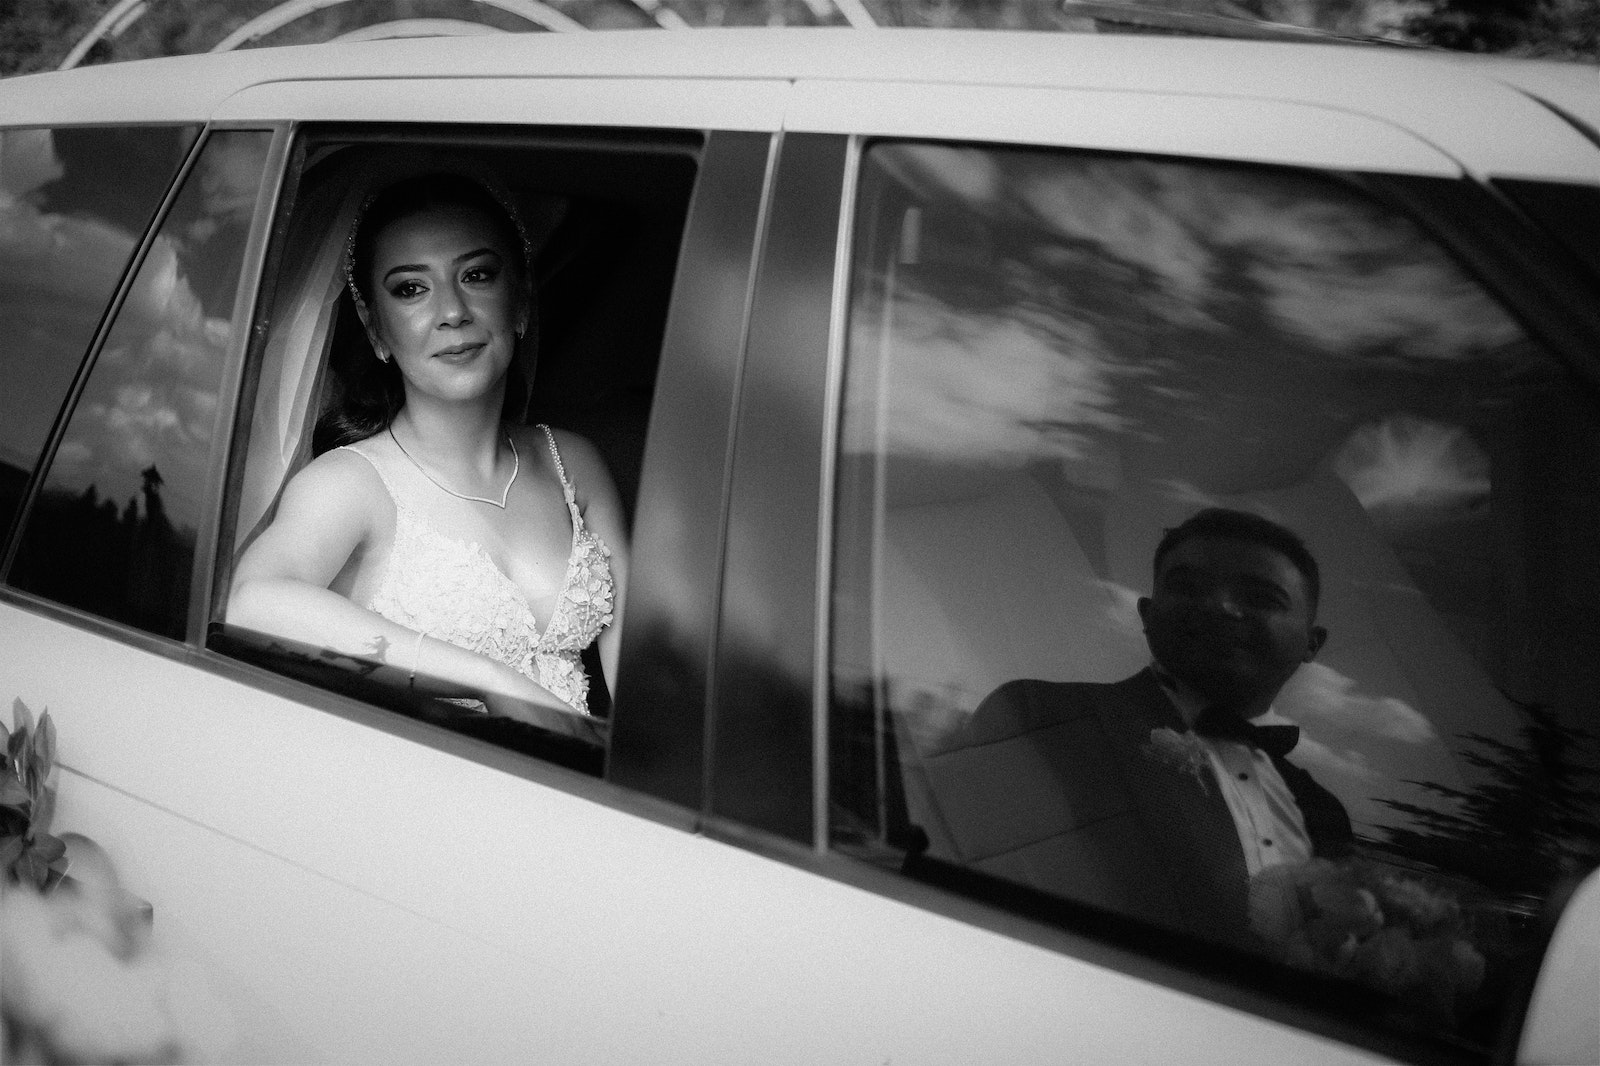 Bridge Sitting in a Limousine and a Reflection of the Bridegroom - denver car service